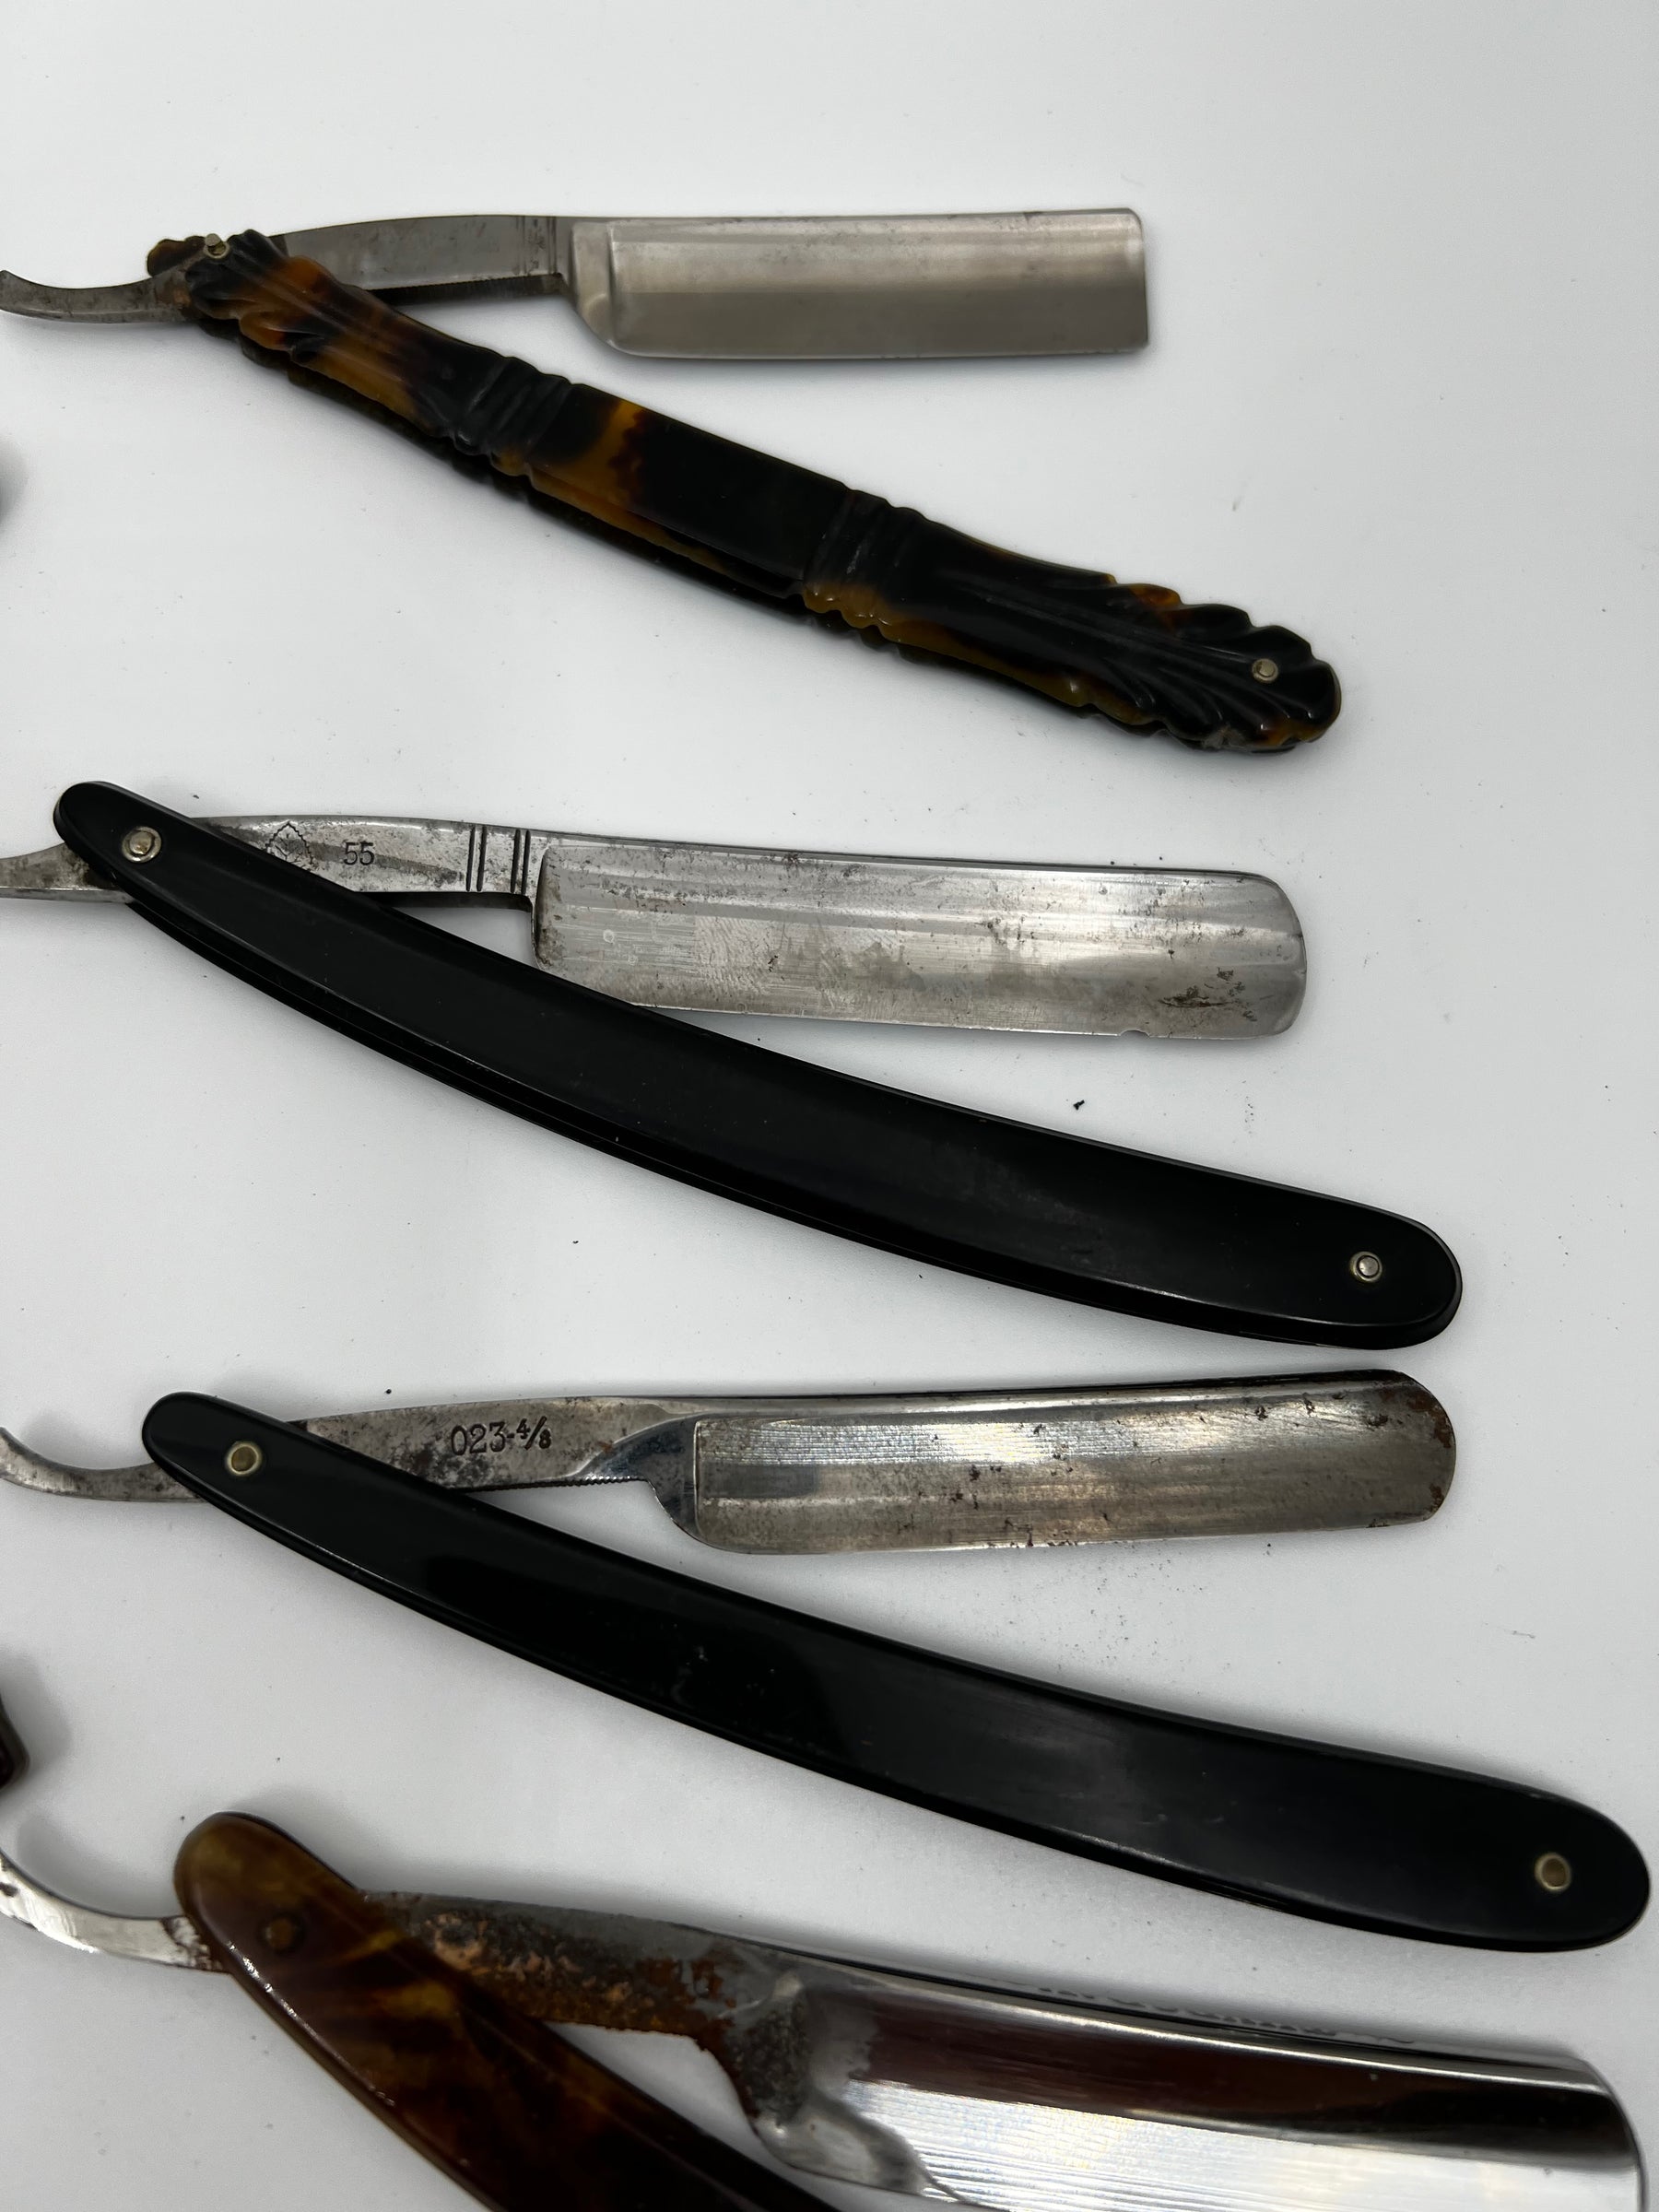 Vintage 10 Straight Razor Lot #23 - May Contain Sheffield, Solingen, Japanese & USA makers, as pictured